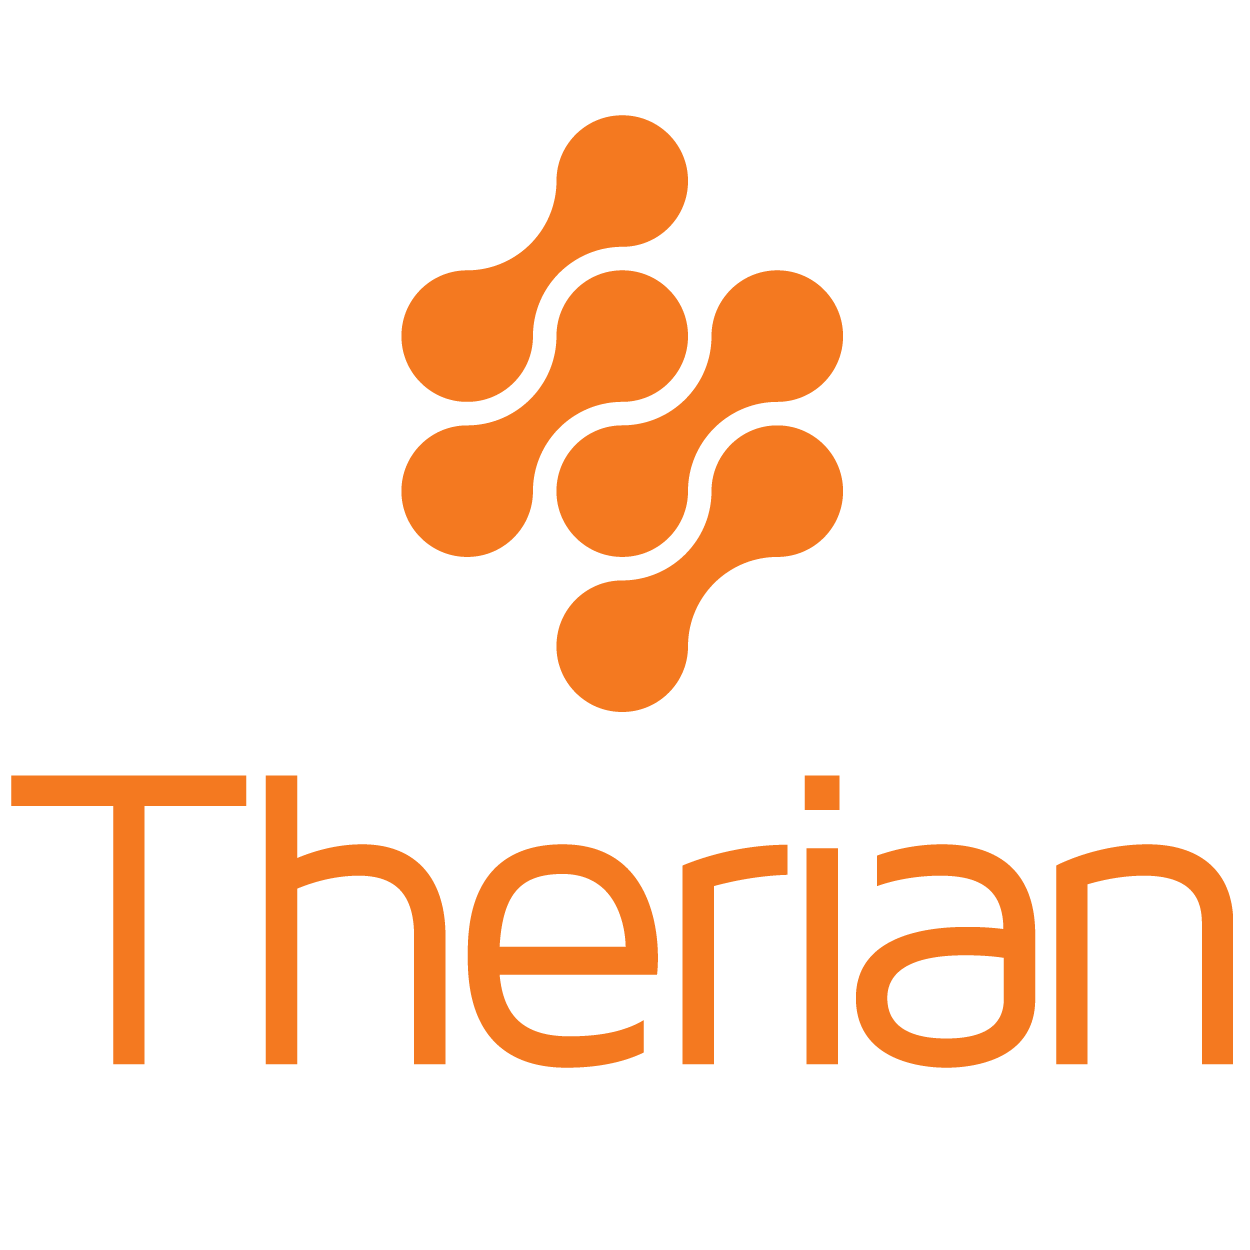 Our Company - Welcome to Therian